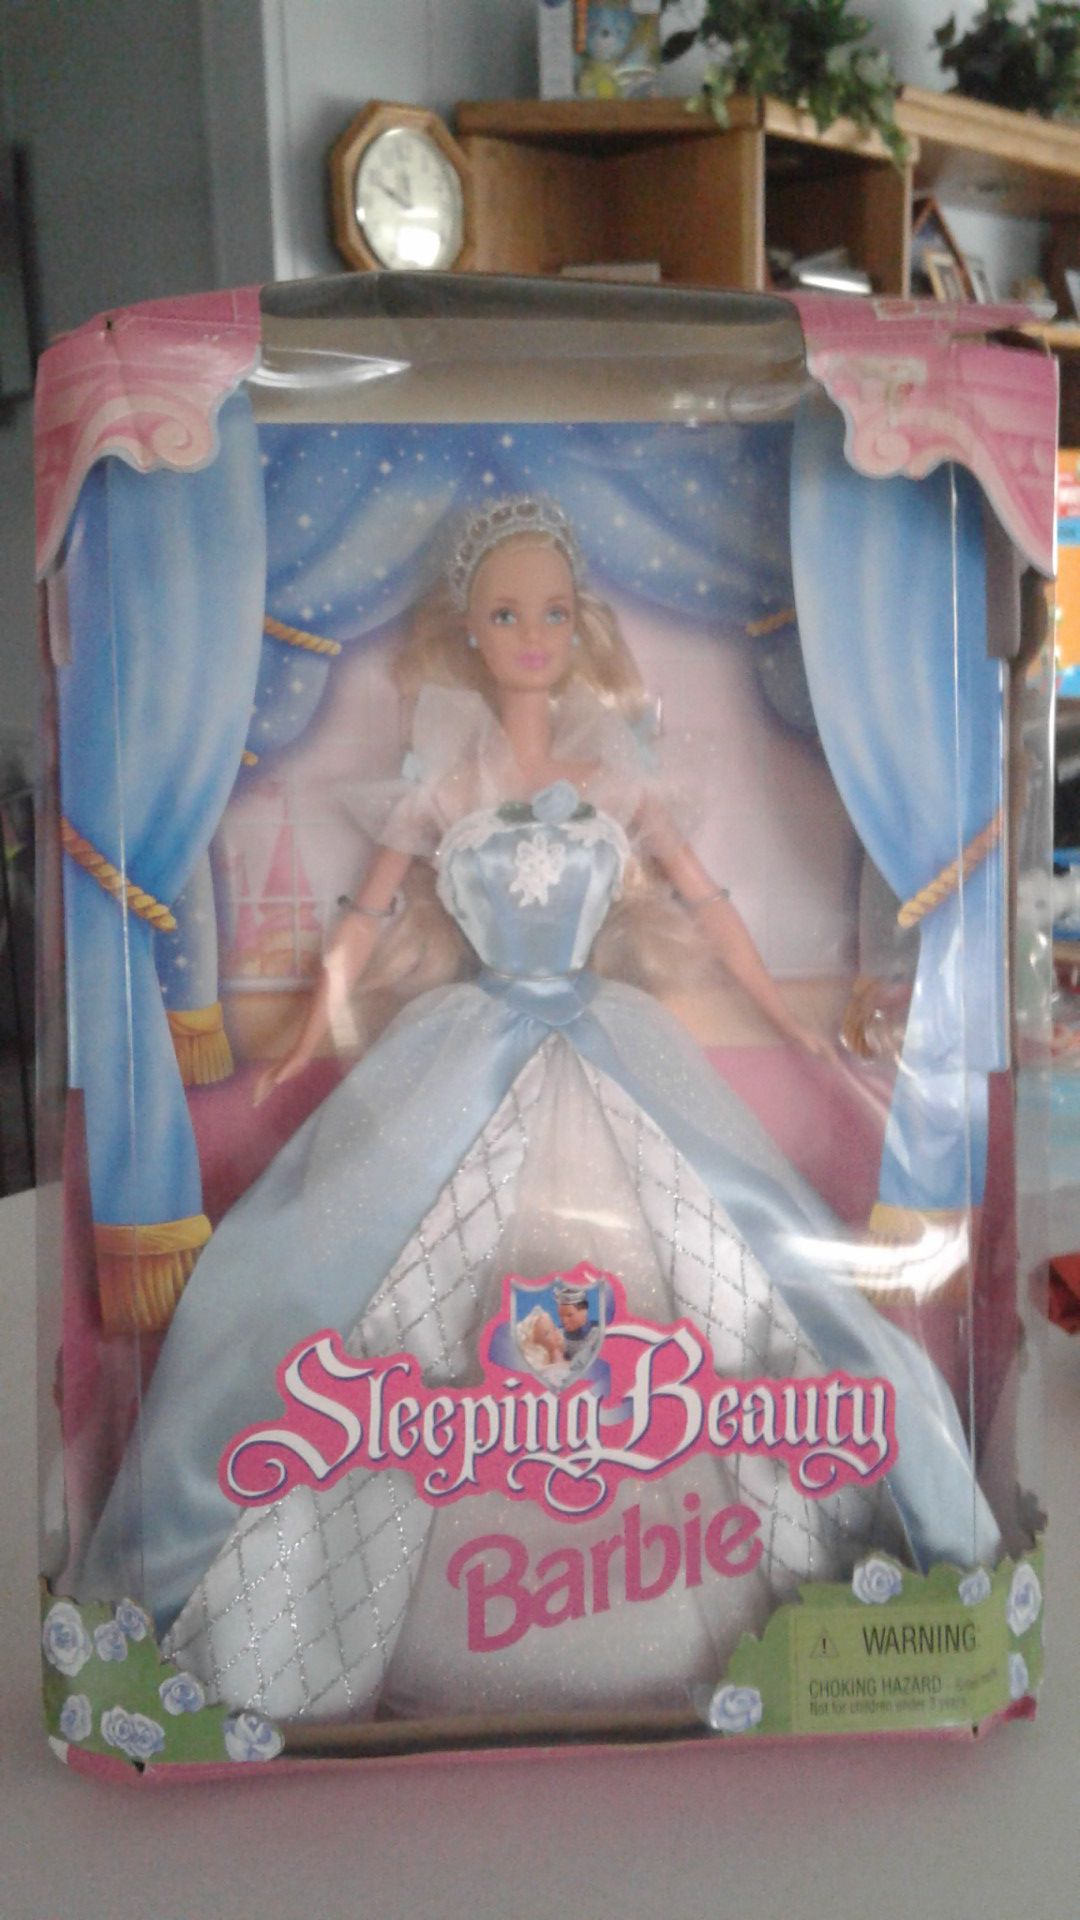 Sleeping beauty Barbie Disney edition 1998 special edition and Angel princess Barbie both new in box collectors edition originals not remkes